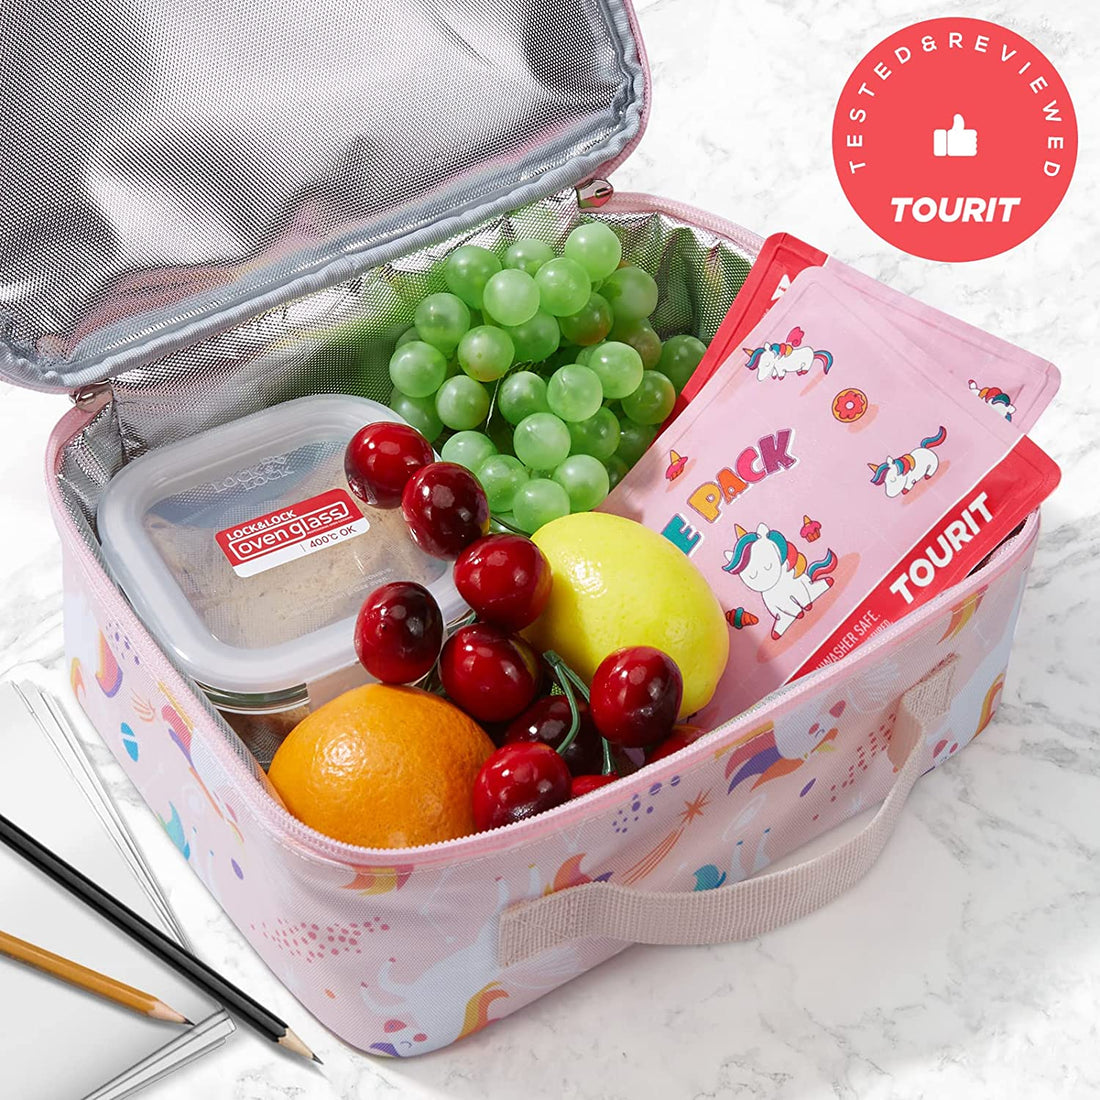 TOPOKO Ice Packs for Lunch Bags, Cooler. Freezer Packs for Lunch Box,  Cooler Bag. Slim Reusable & Long-Lasting, BPA-Free, Quick Freeze, Perfect  for Picnic, Camping, Beach, Outdoor Sports. 